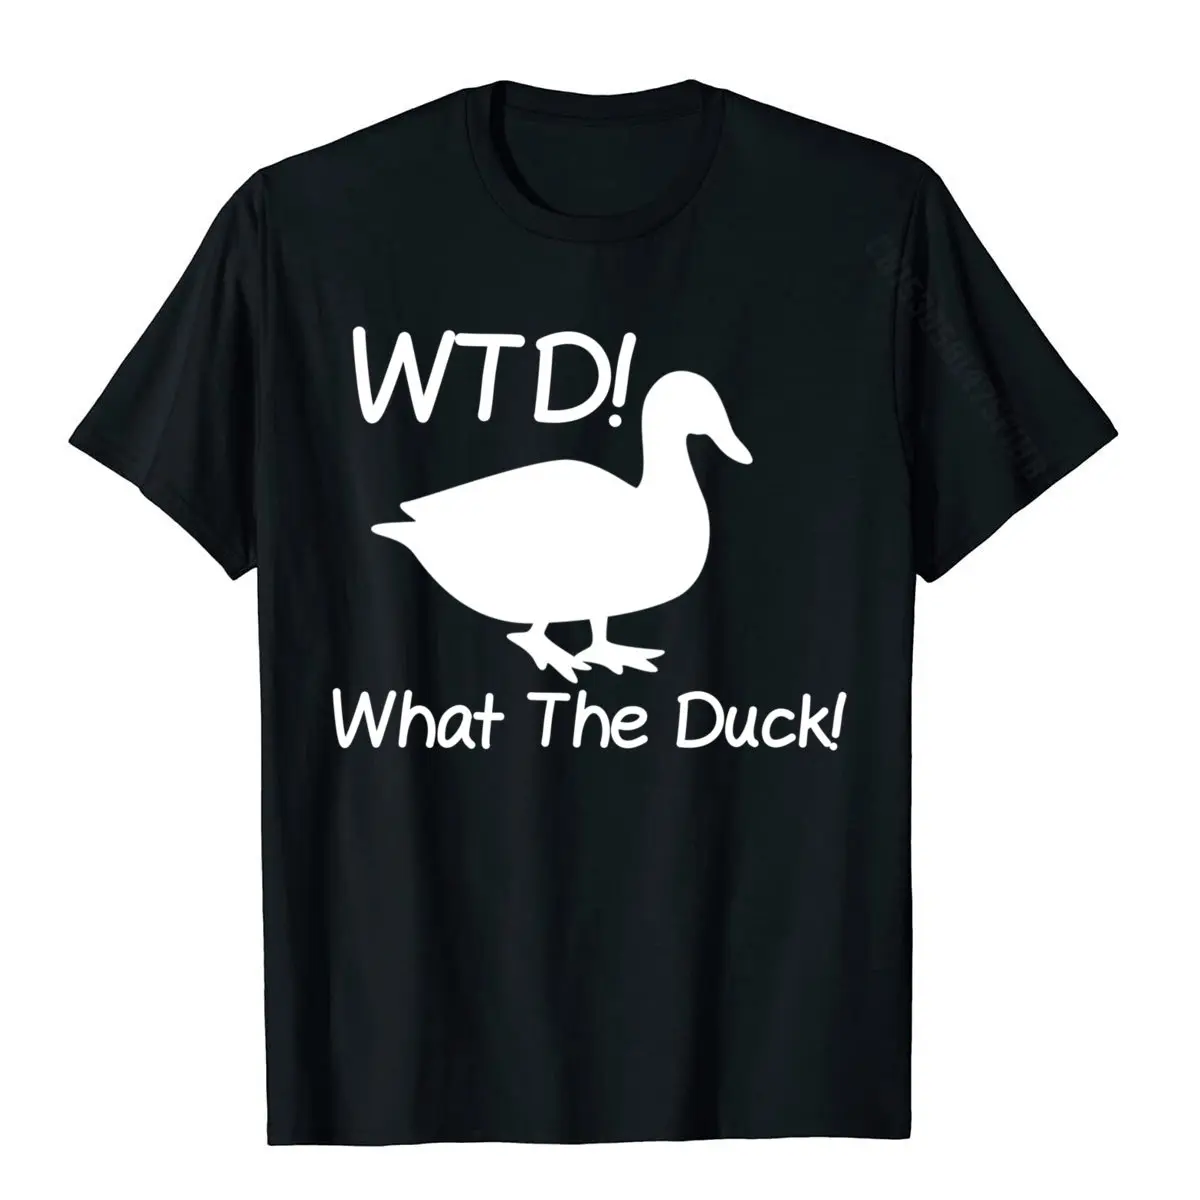 What The Duck Funny Duck T-Shirt Cotton Men T Shirt Printed Tees Fitted Casual Funny Summer Tops Short Sleeve